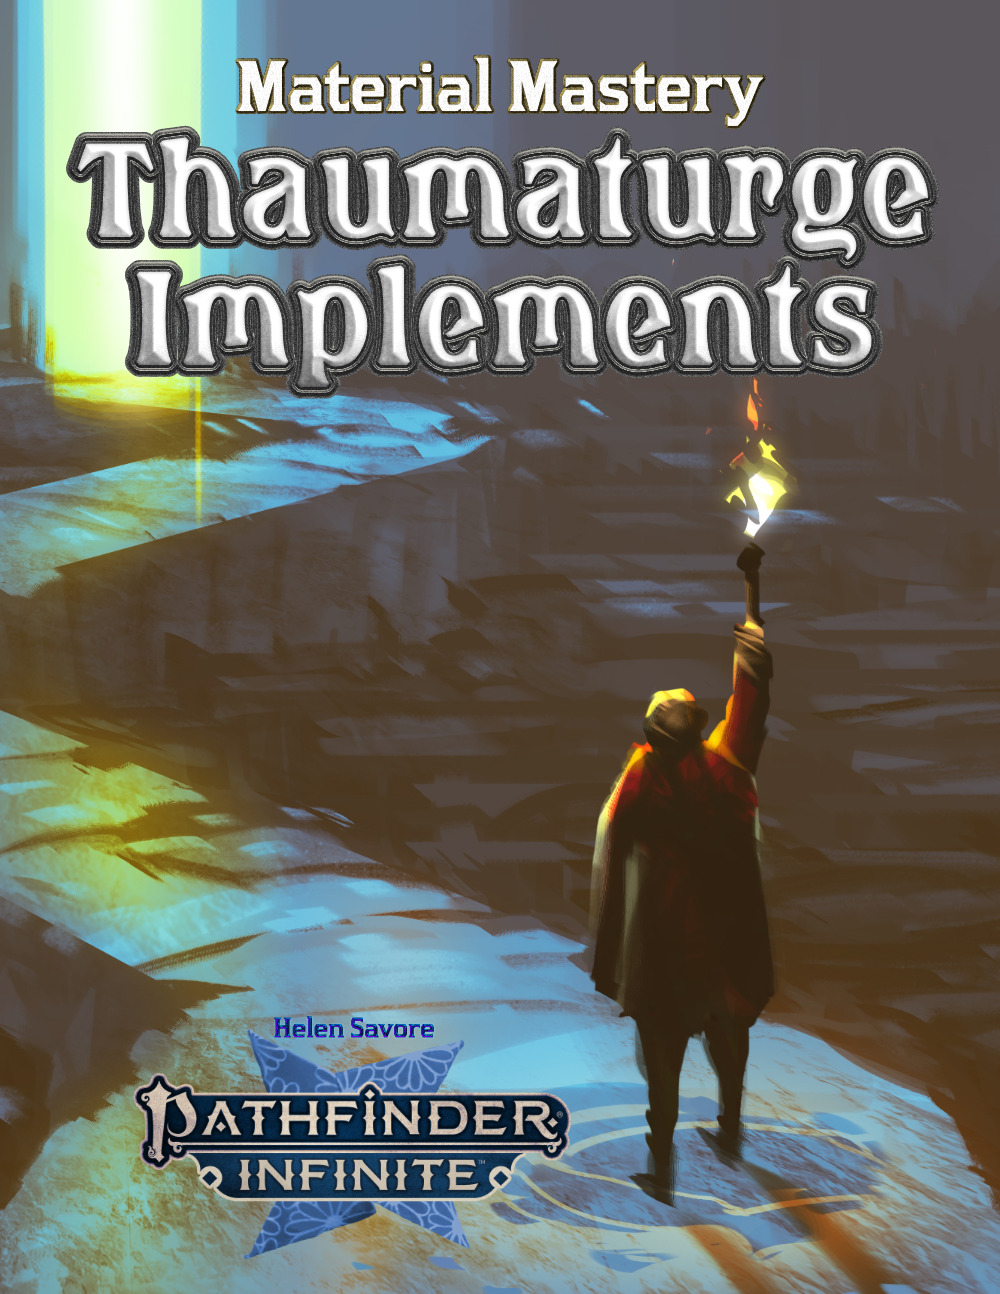 Material Mastery Thaumaturge Implements. Cover has a person with a torch on a winding path towards a glowing light.